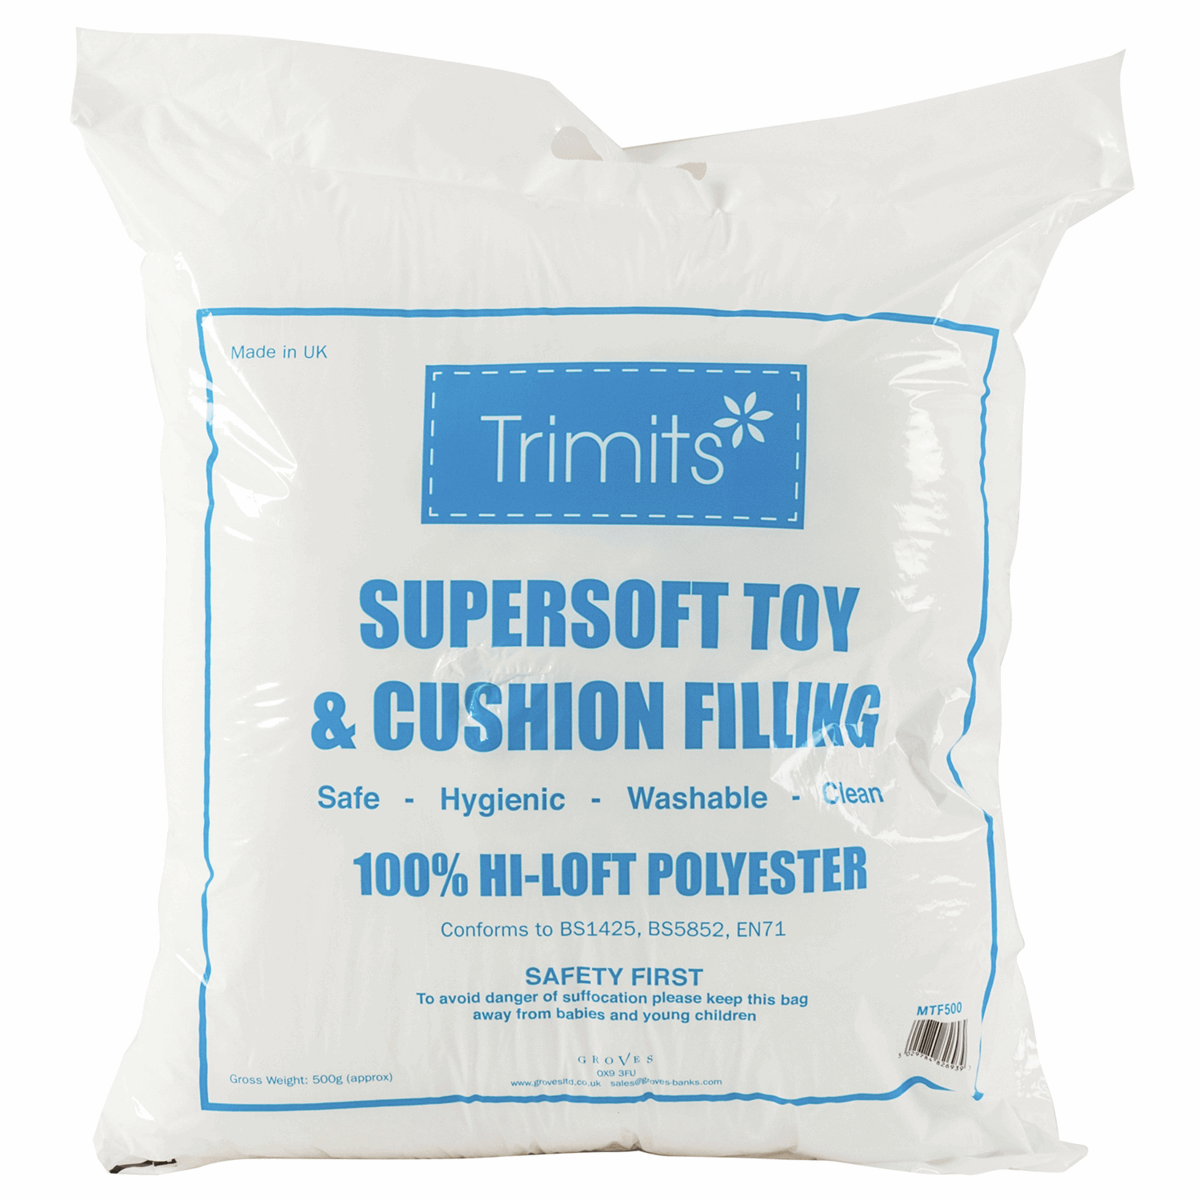 Supersoft Toy & Cushion Filling 500gm